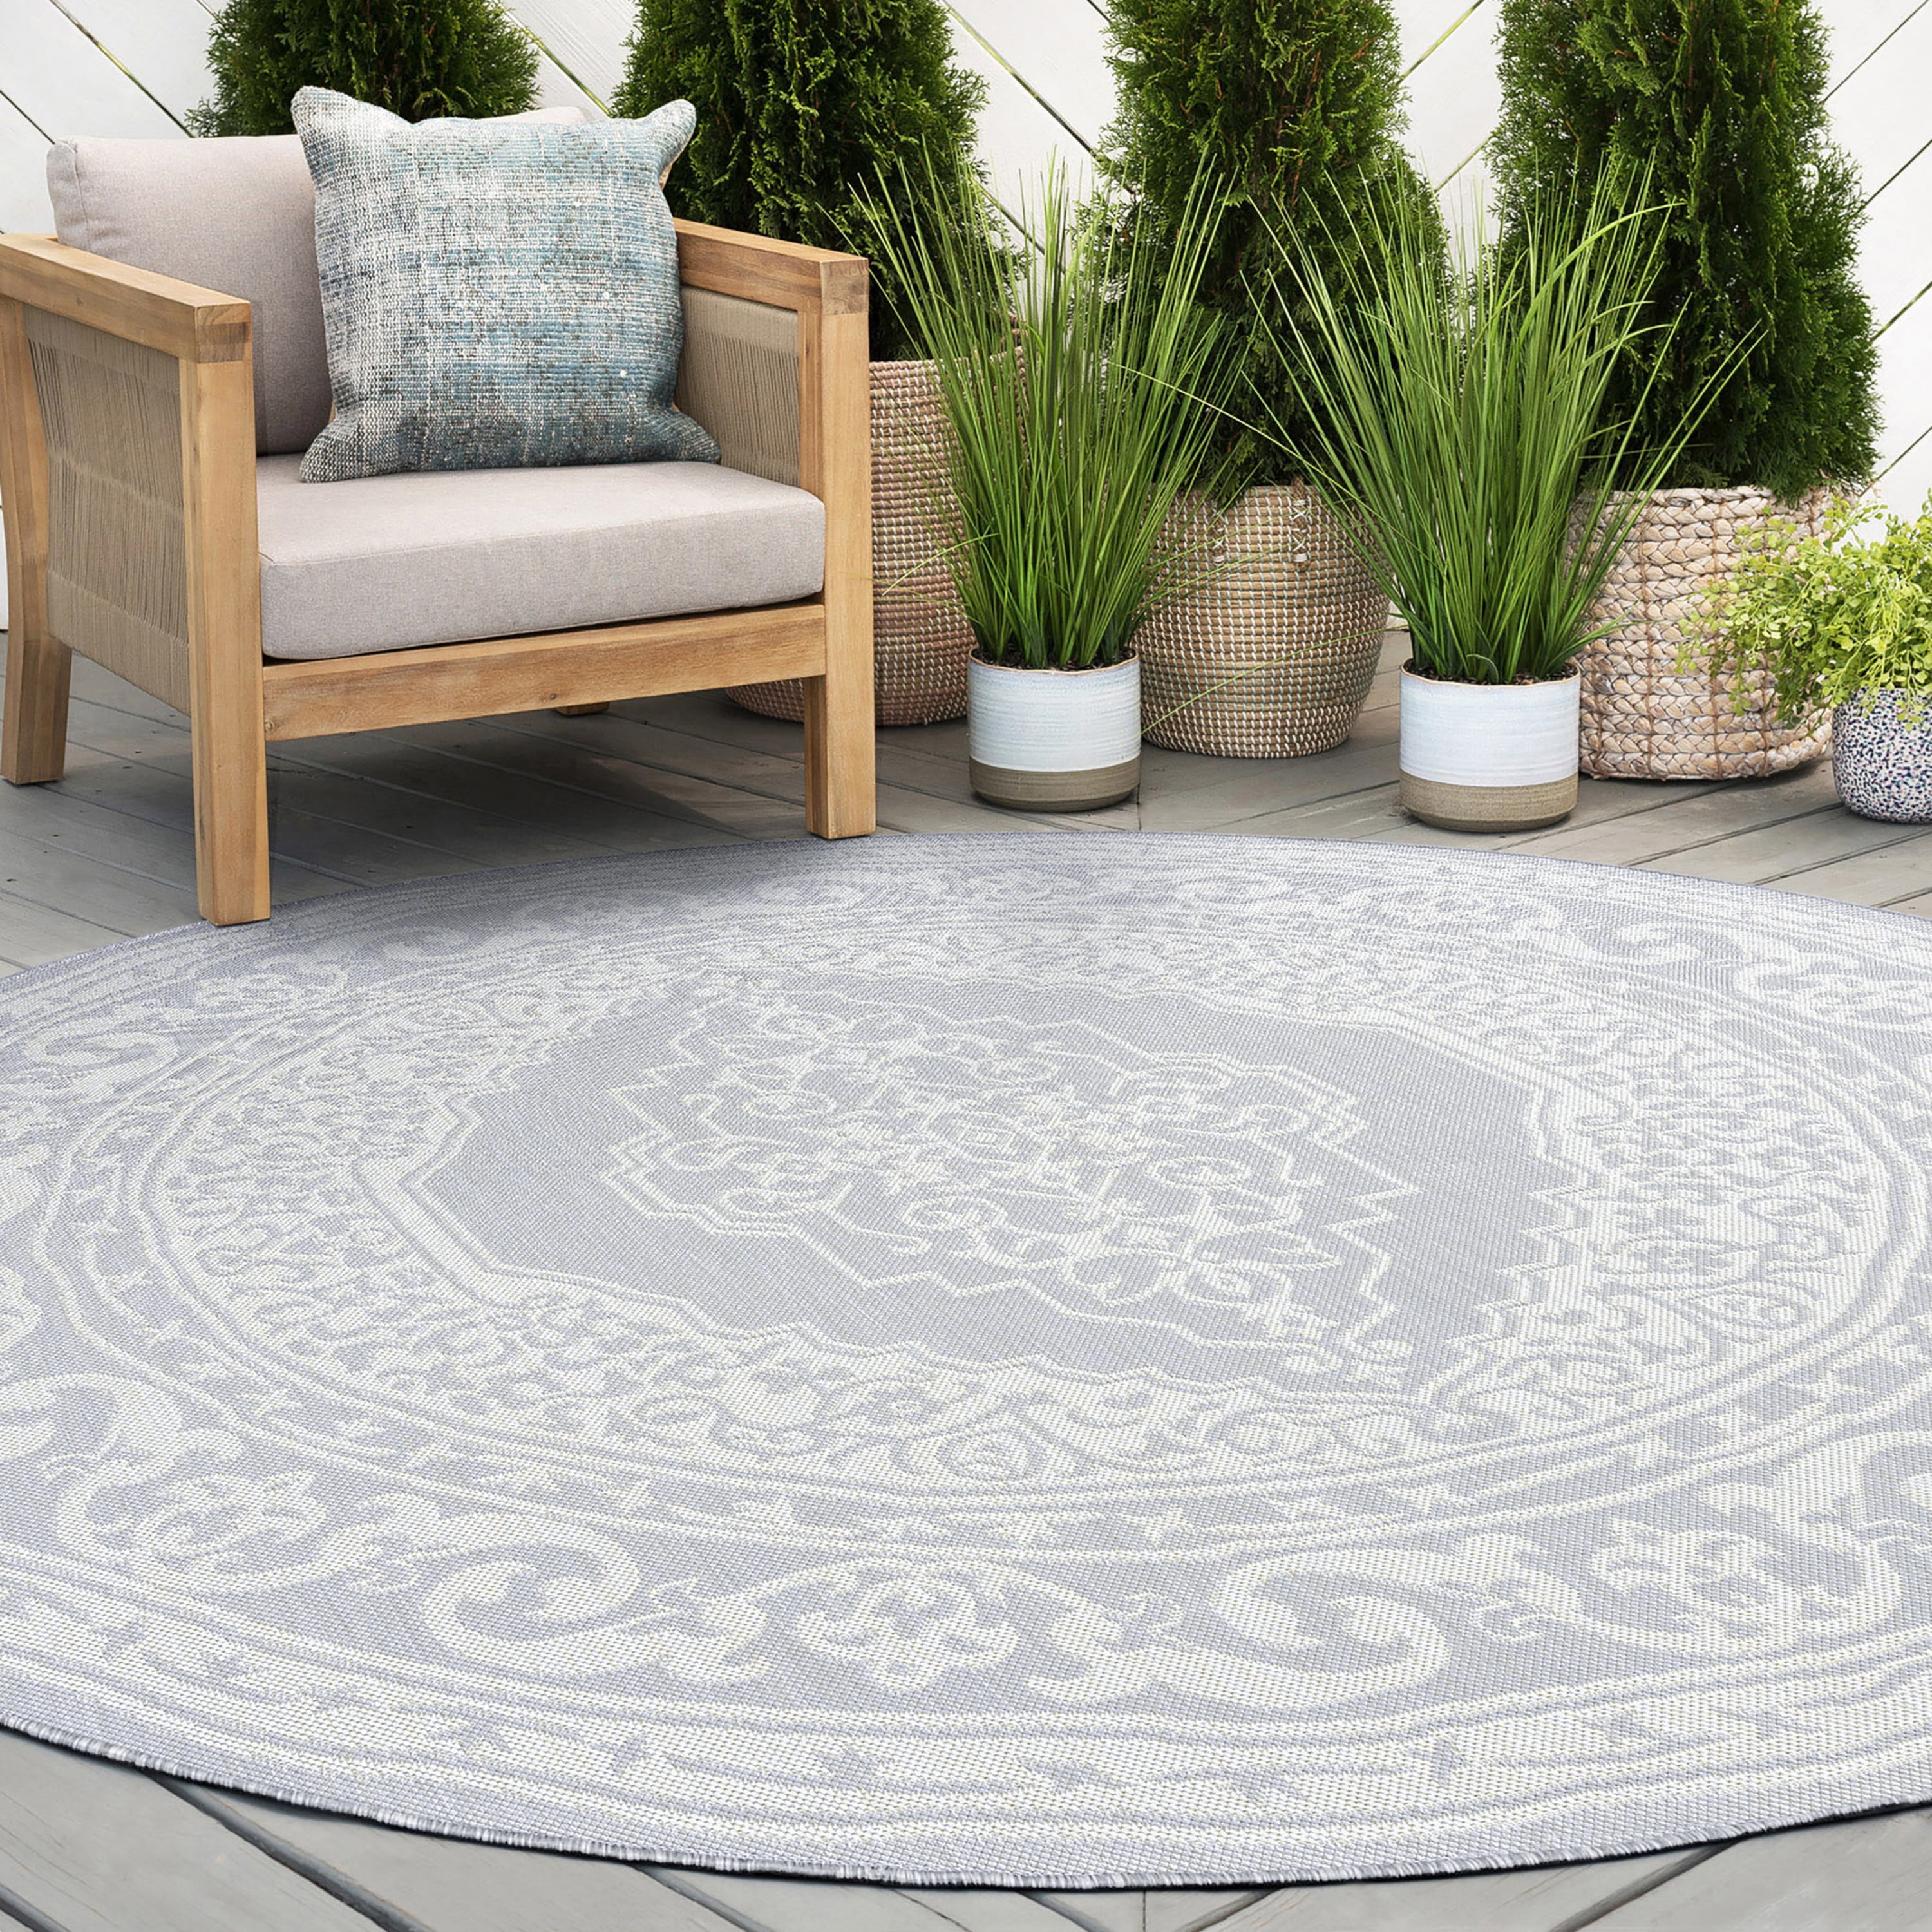 4x6 Water Resistant, Indoor Outdoor Rugs for Patios, Front Door Entry,  Entryway, Deck, Porch, Balcony, Outside Area Rug for Patio, Gray, Floral